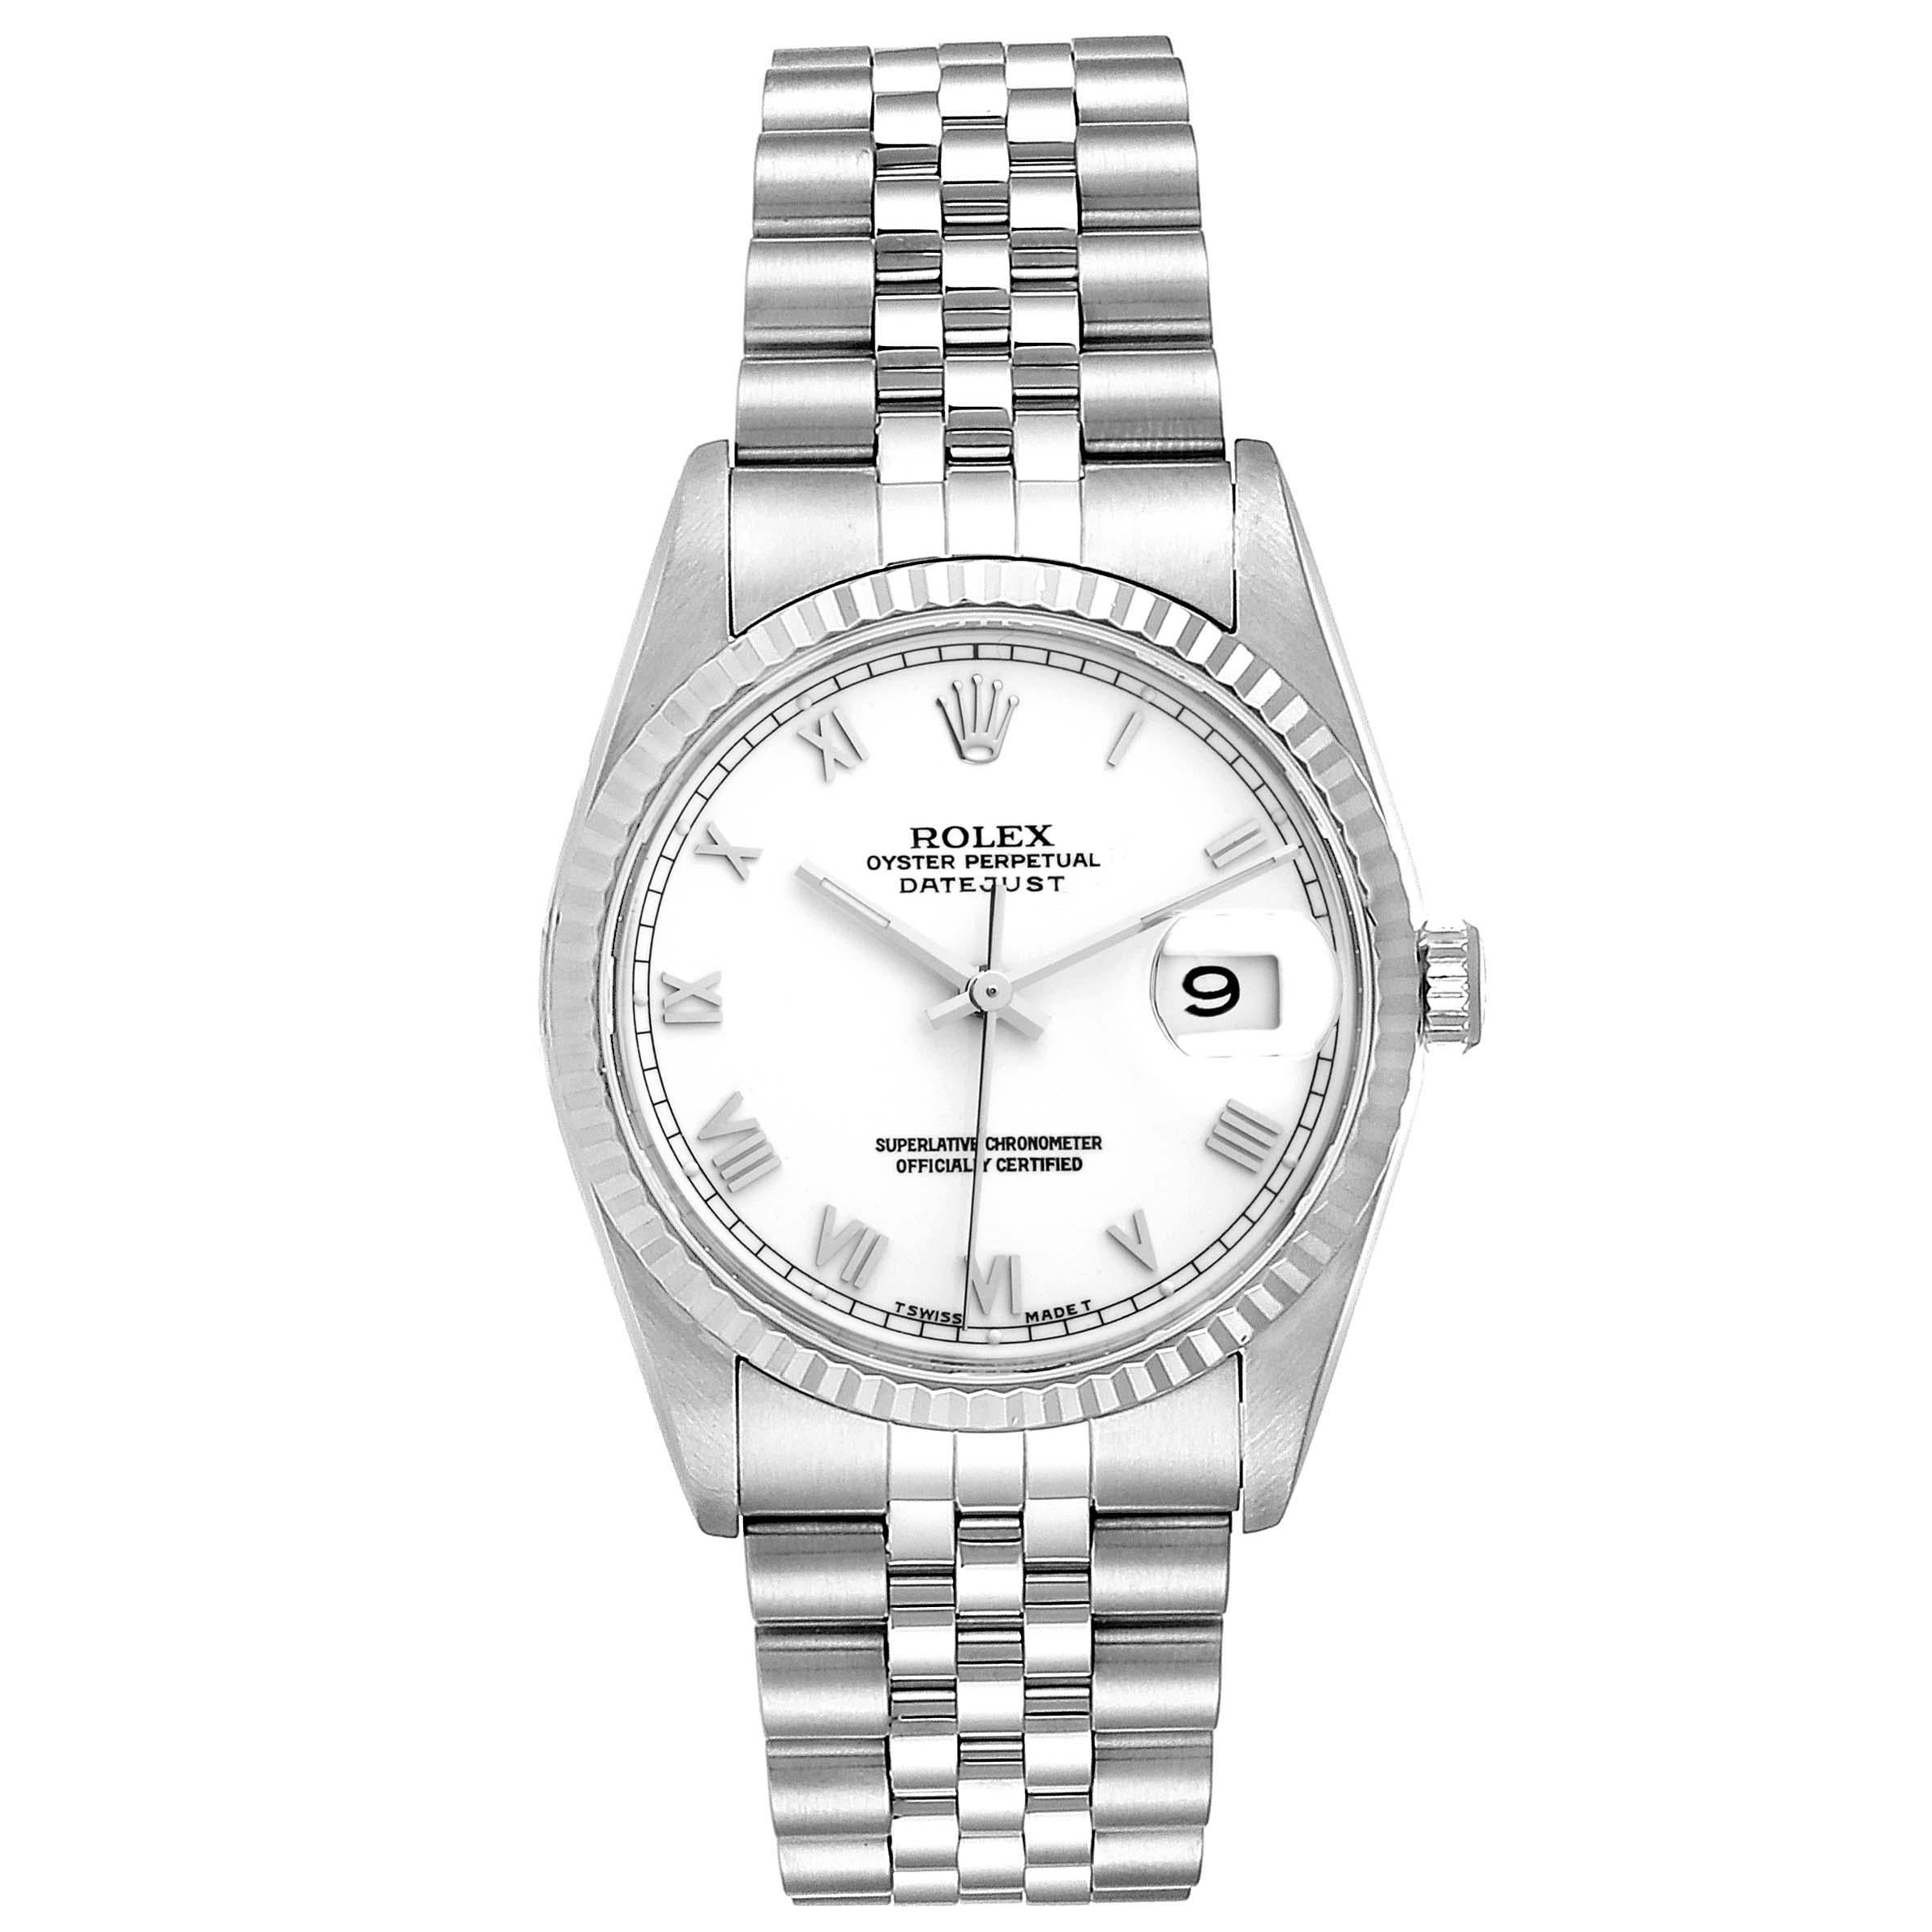 Rolex Datejust 36 Steel White Gold Fluted Bezel Mens Watch 16234. Officially certified chronometer self-winding movement. Stainless steel oyster case 36 mm in diameter. Rolex logo on a crown. 18k white gold fluted bezel. Scratch resistant sapphire